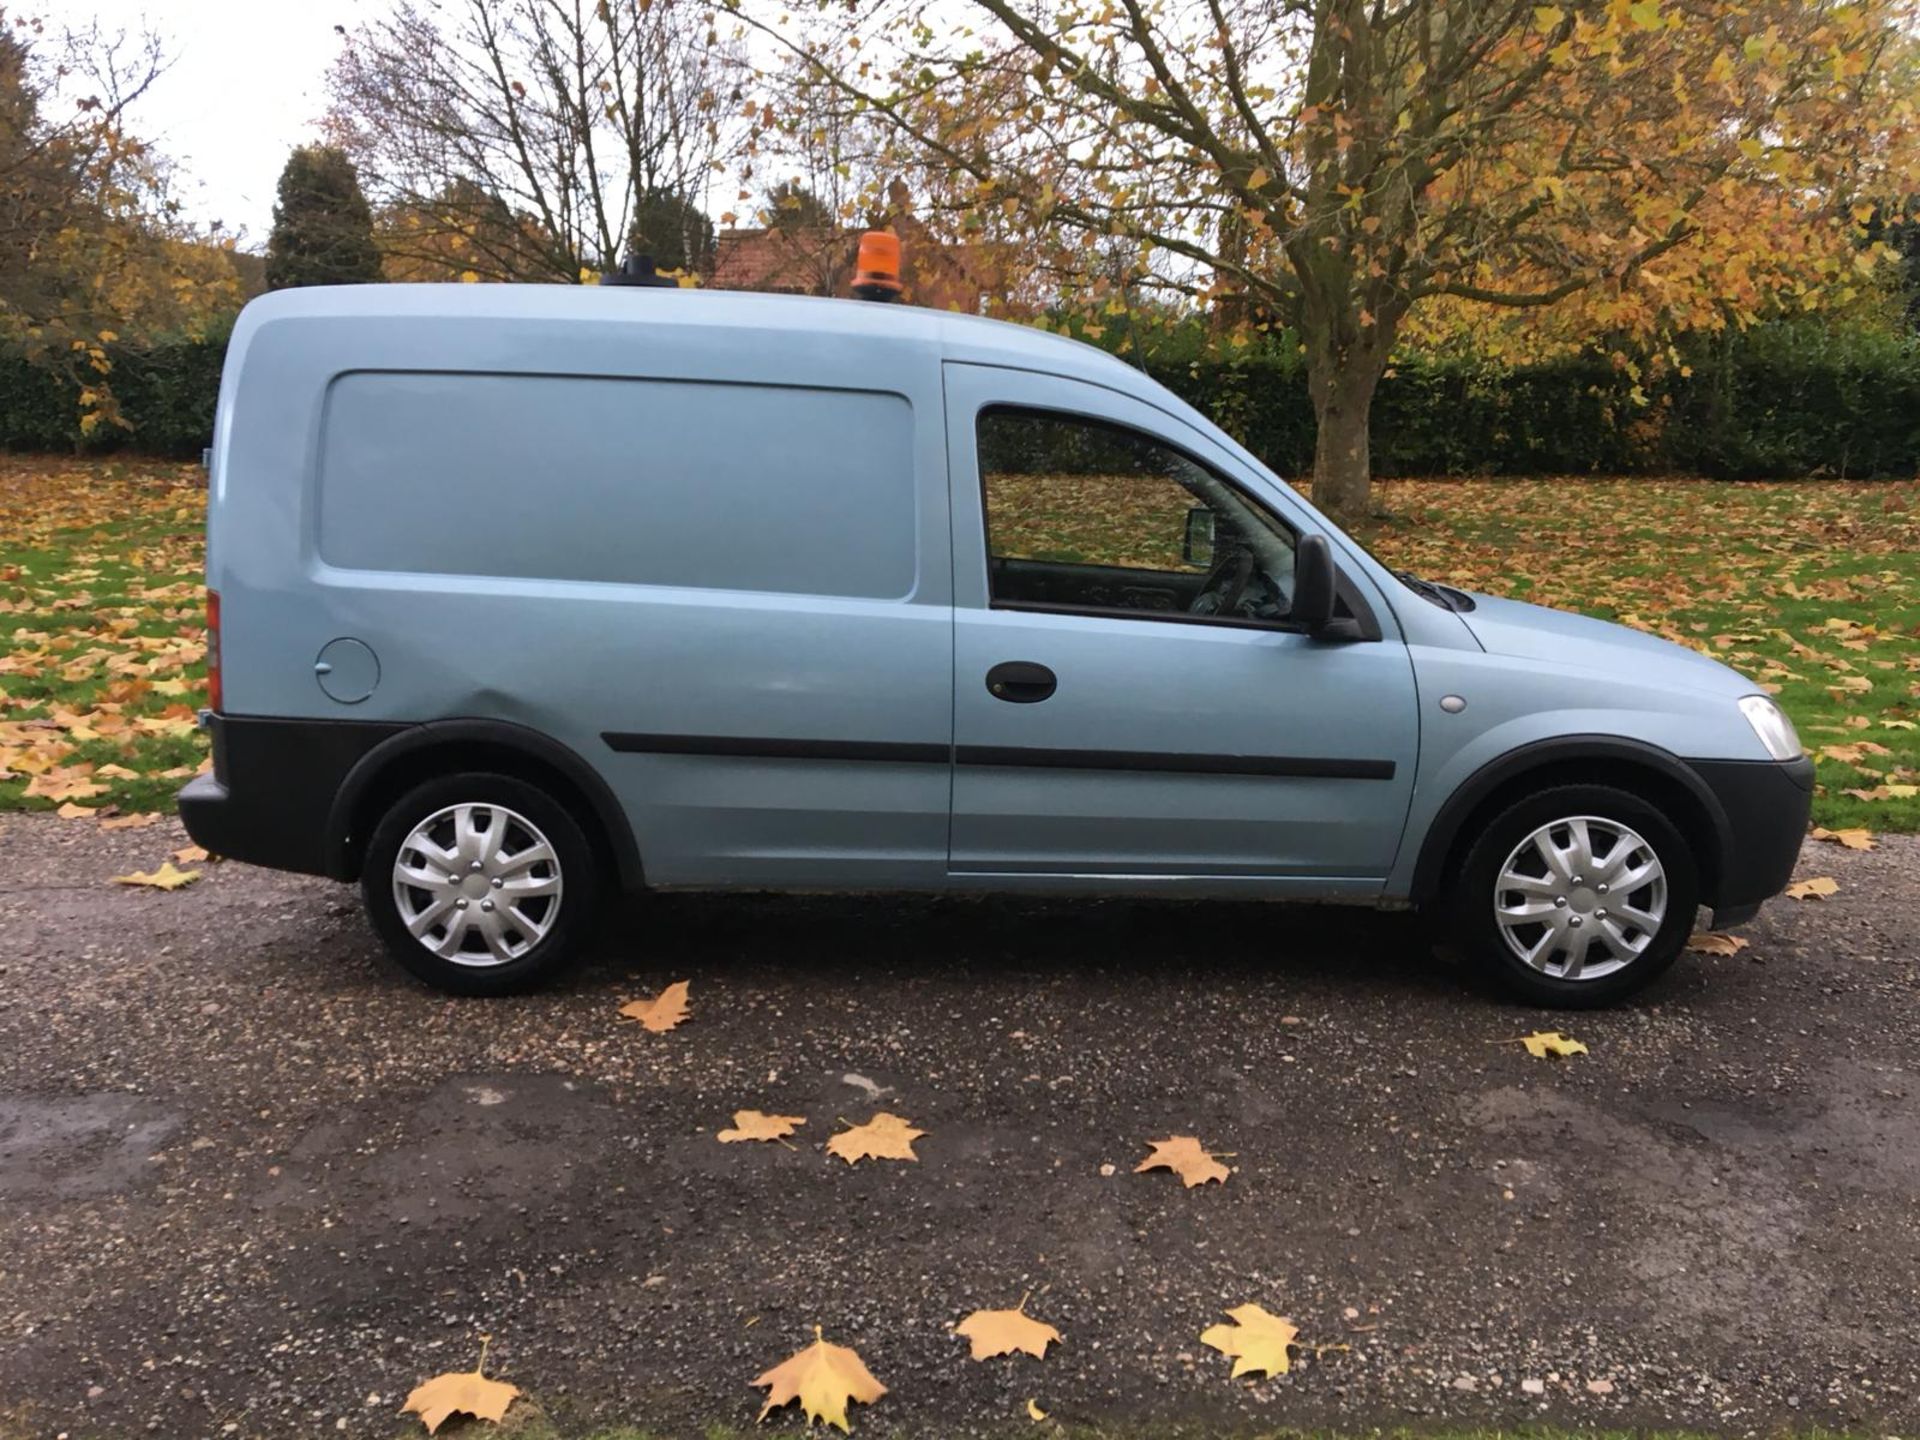 2011/11 REG VAUXHALL COMBO 2000 CDTI SEMI-AUTO GEARBOX, SHOWING 0 FORMER KEEPERS *NO VAT* - Image 7 of 12